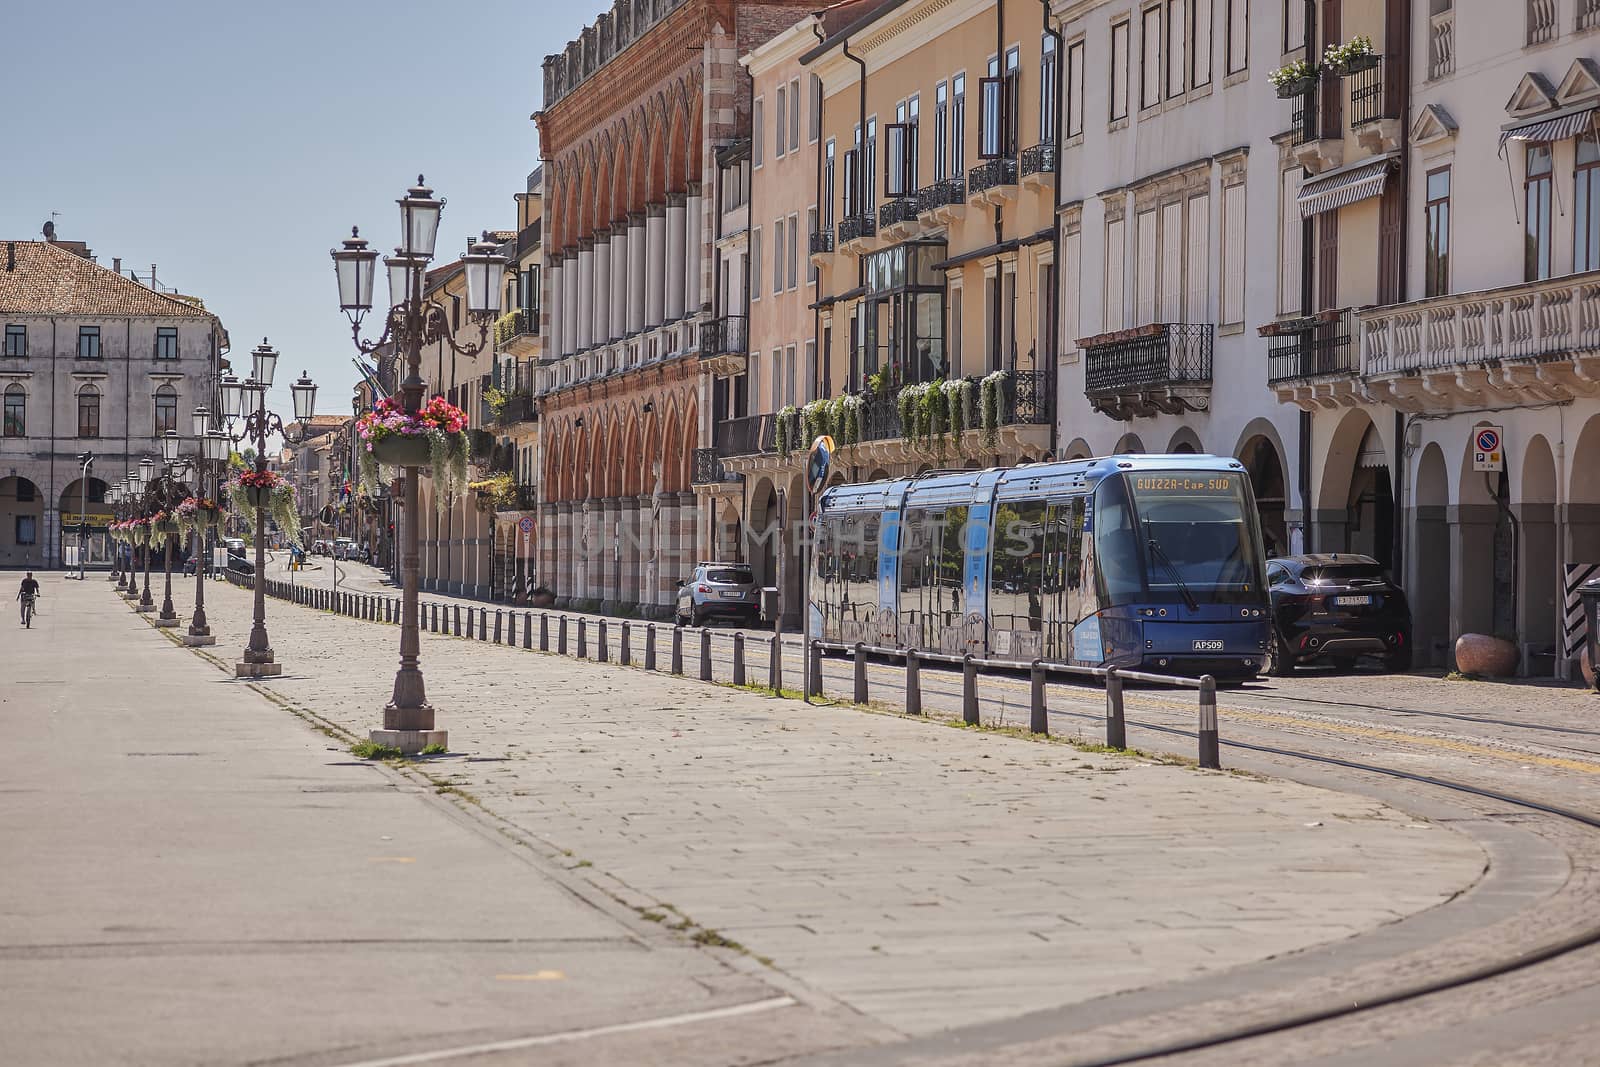 A tram goes through the street of Padua in Italy by pippocarlot